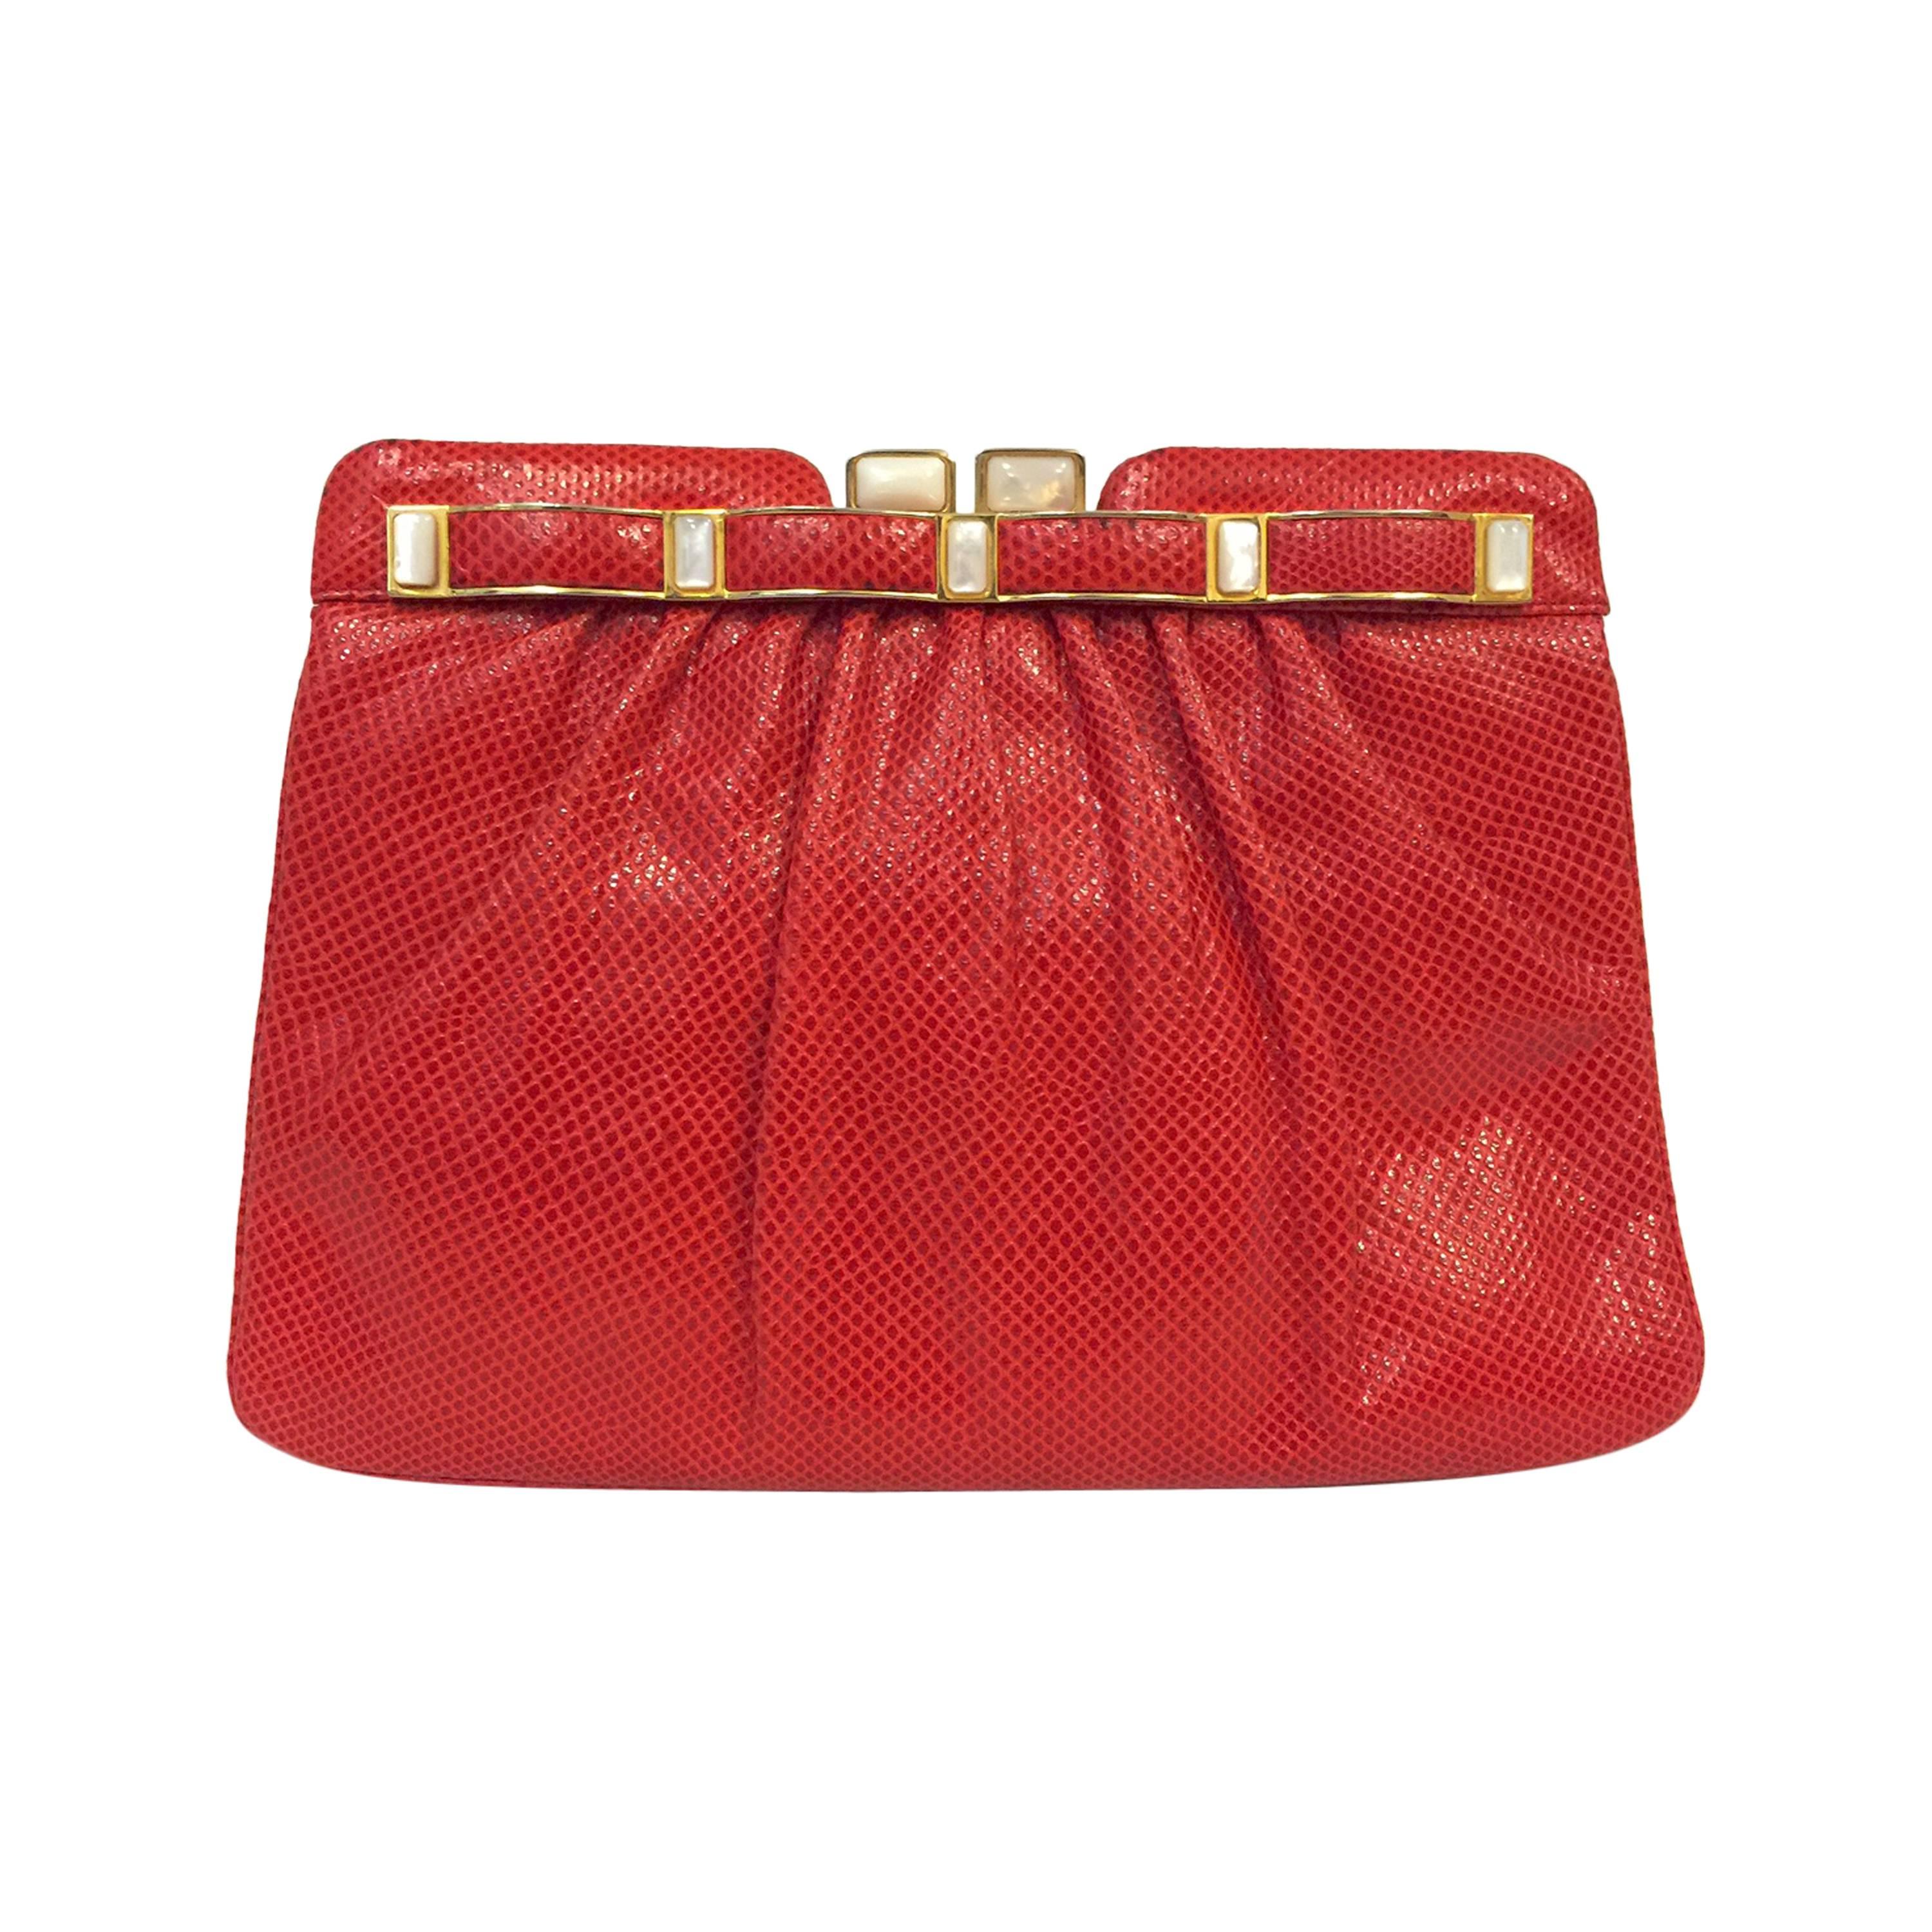 Vintage Judith Leiber Red Leather Lizard Evening Clutch For Sale